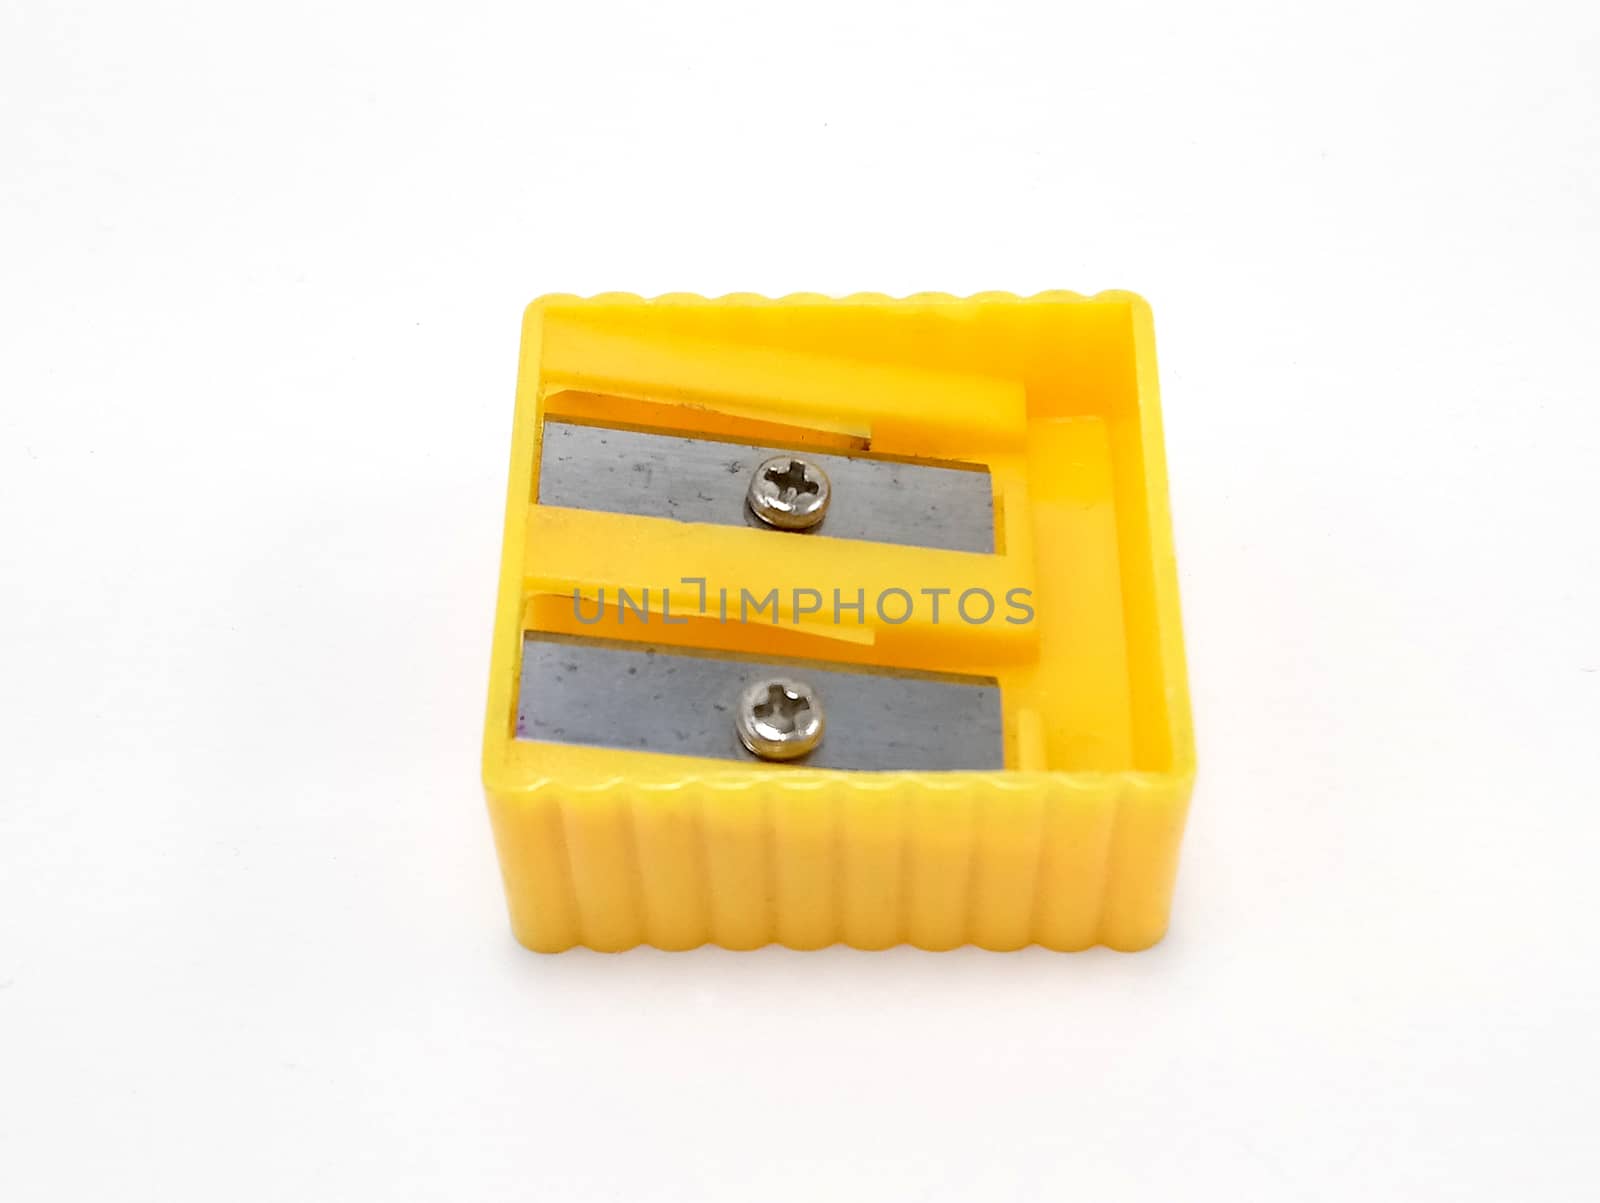 Two slot yellow pencil sharpener use to sharpen the tip point of pencil